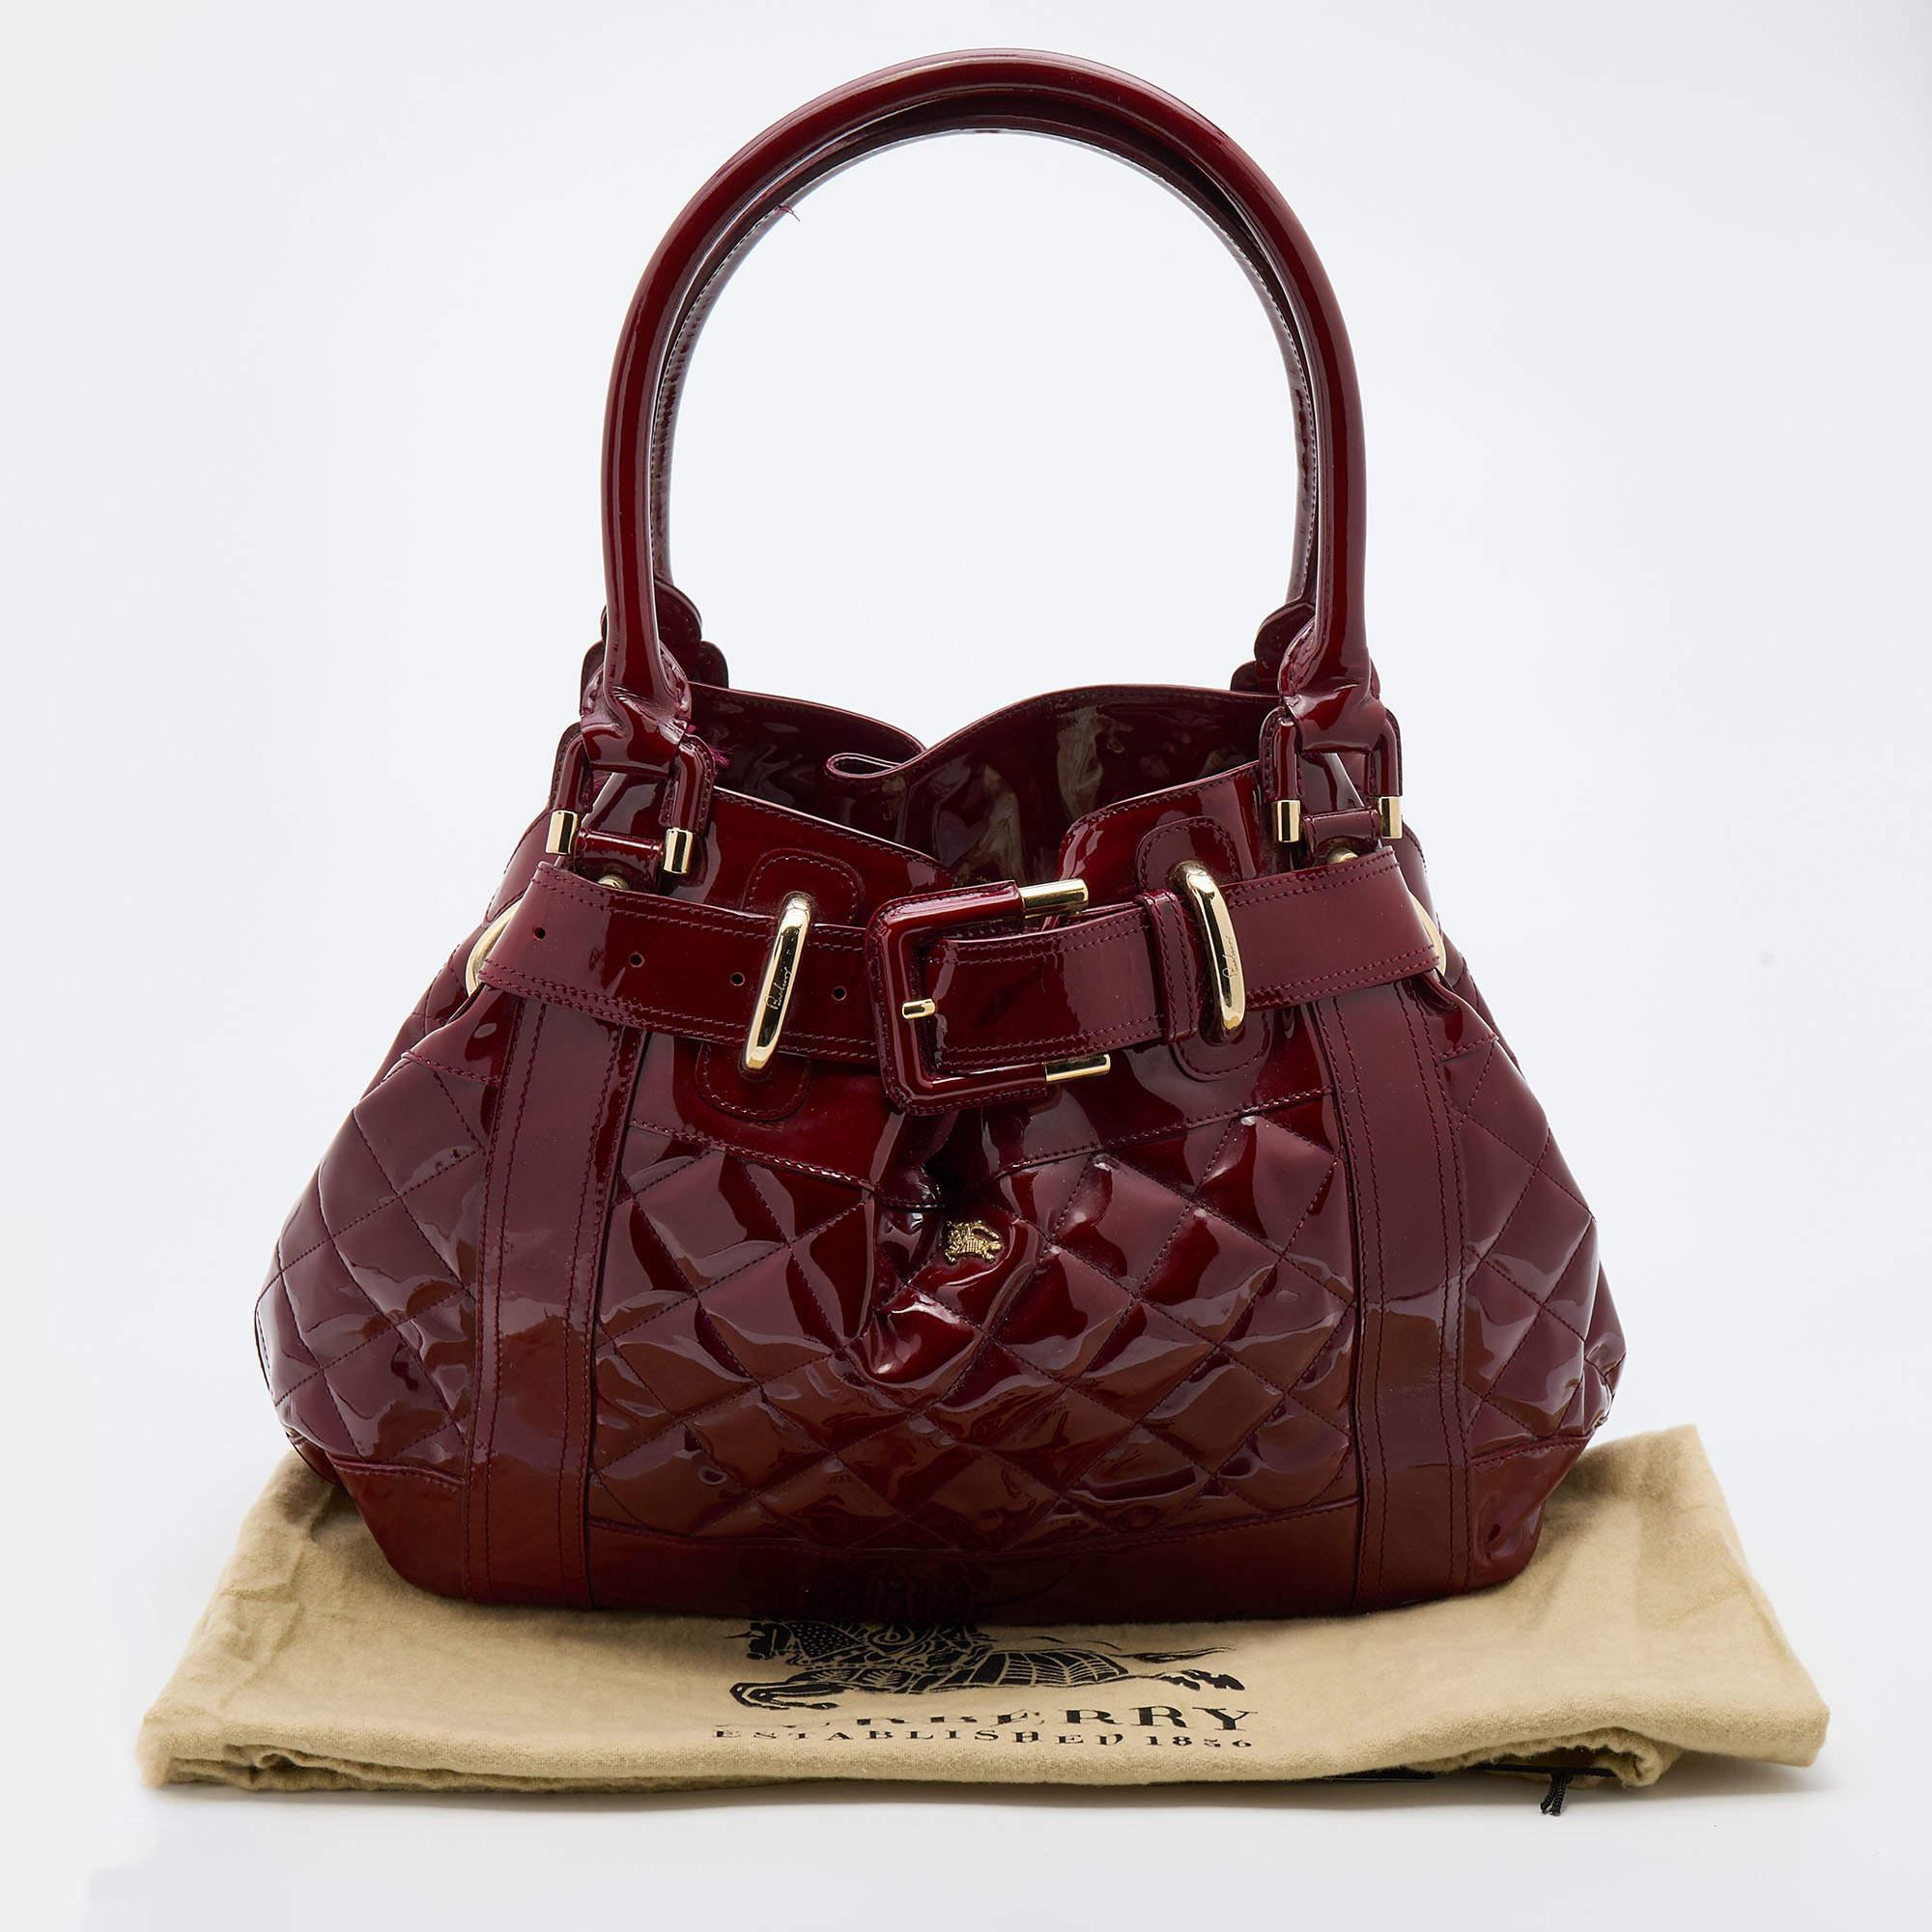 Burberry Red Patent Leather Quilted Prorsum Beaton Tote 7